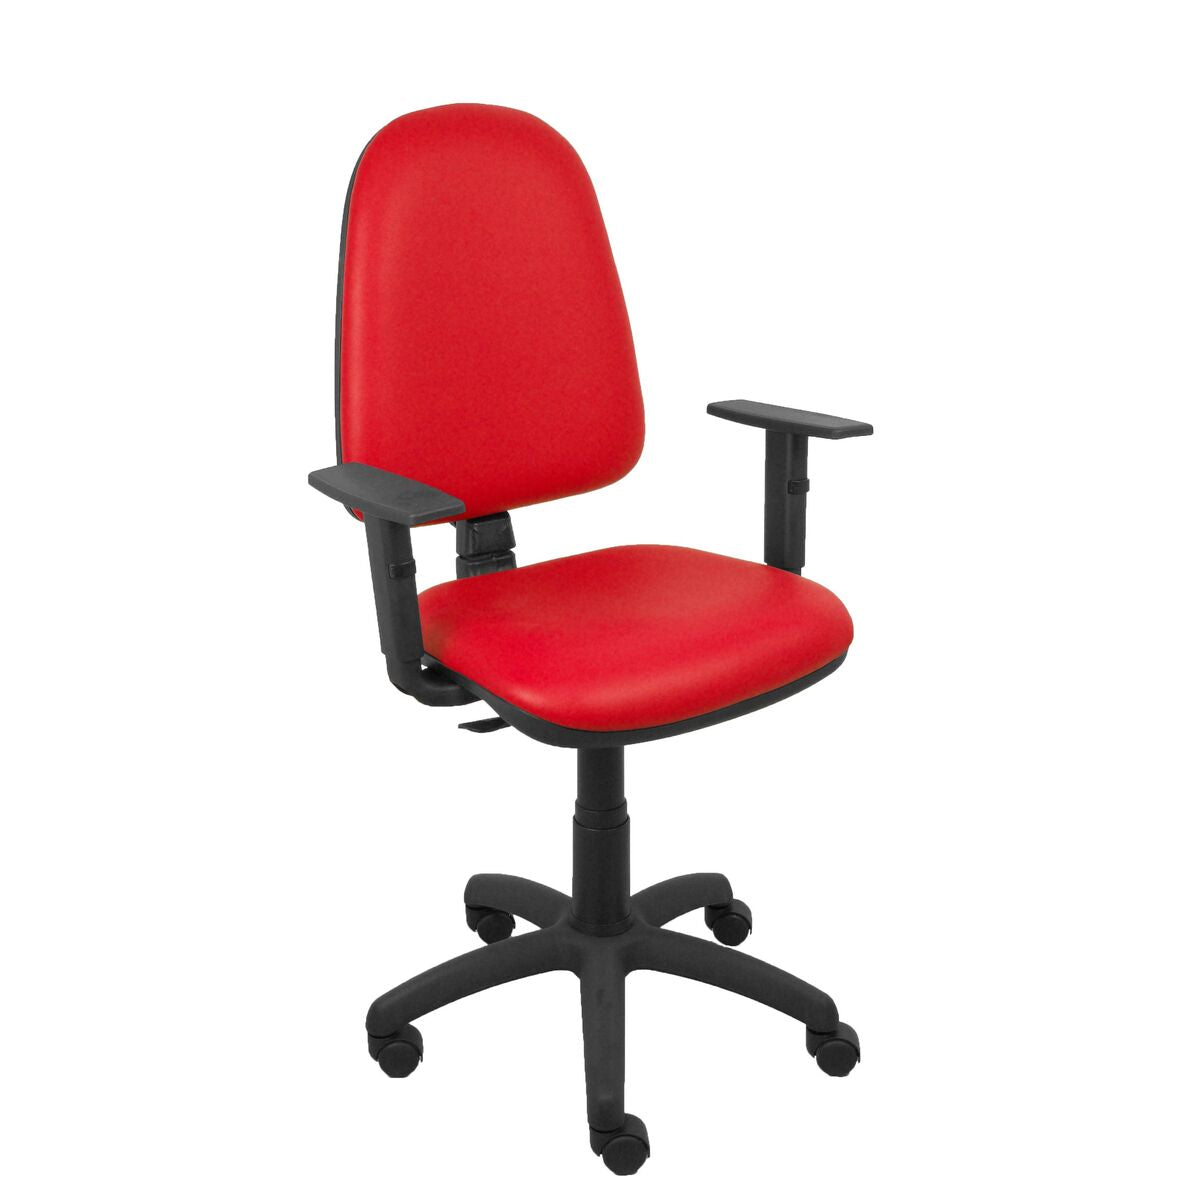 Office Chair P&C P350B10 Red